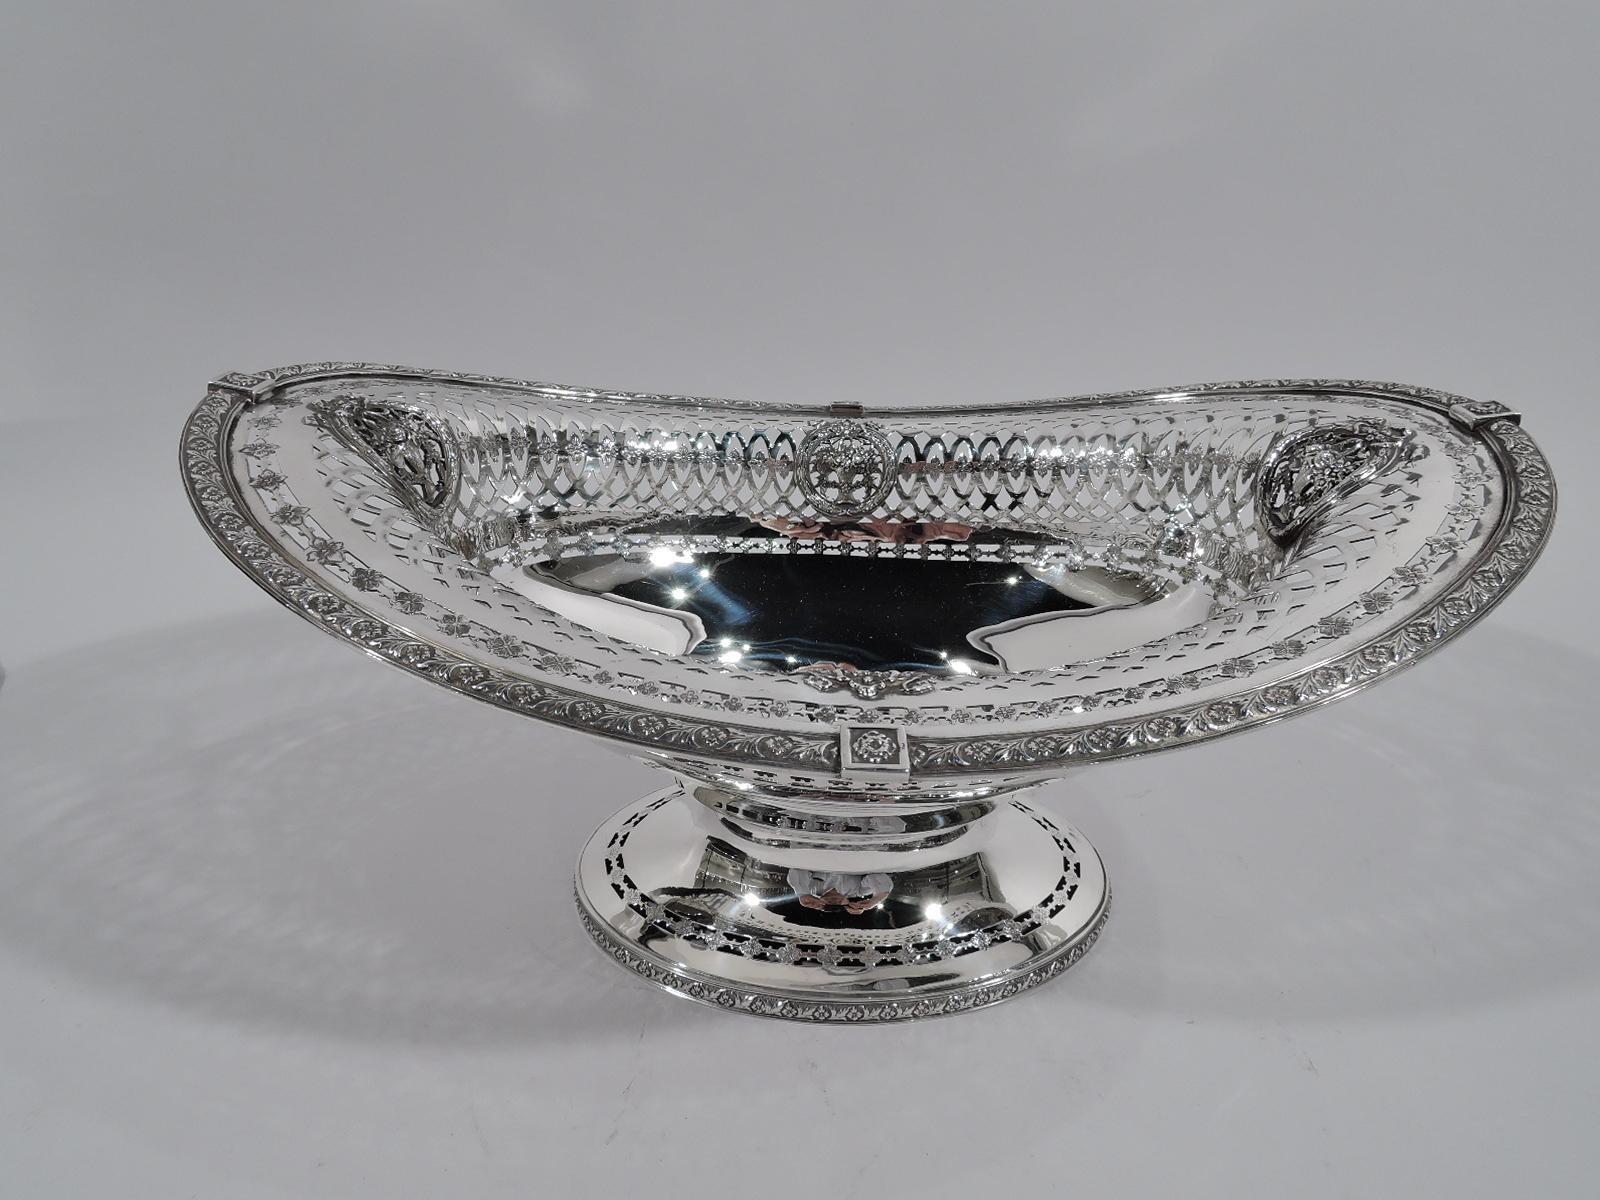 American Edwardian sterling silver bowl, circa 1900. Boat-form oval with solid well. Sides have pierced and interlaced ovals inset with blossoms, and rondels inset with flower baskets. Raised oval foot. Pierced blossom borders and chased